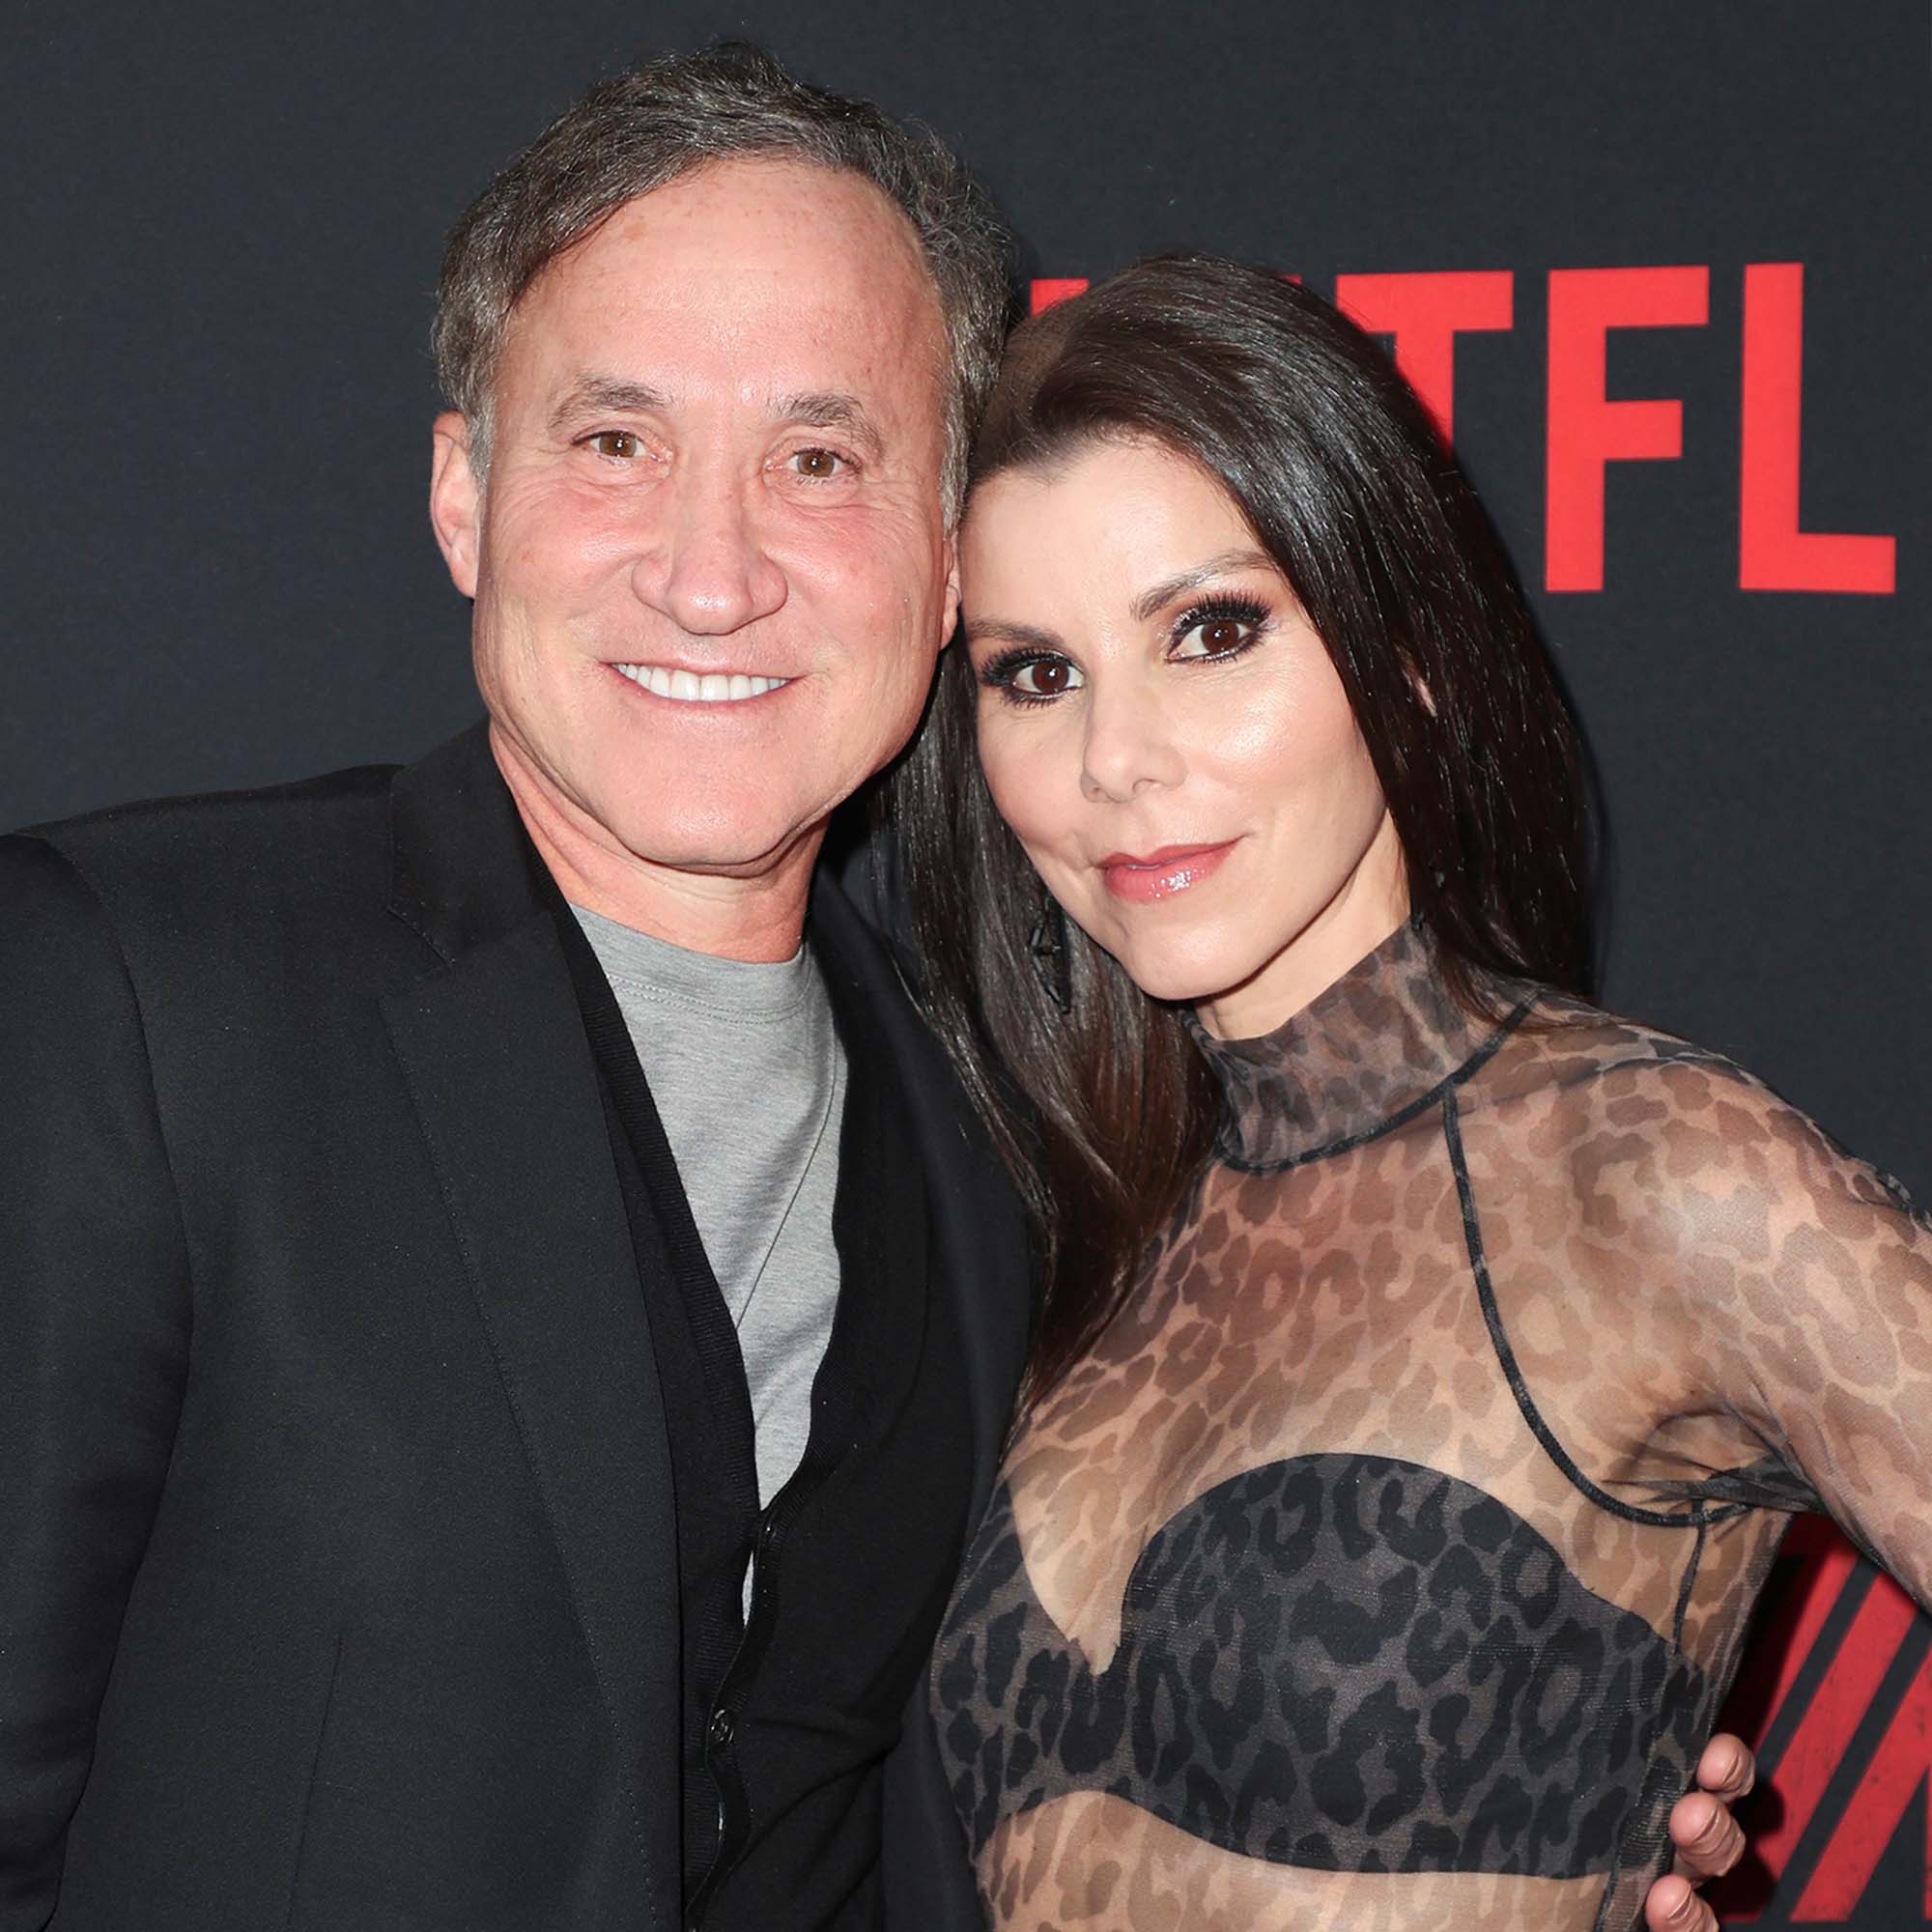 Heather Dubrow Wedding Dress Still Fits After 17 Years: Photo